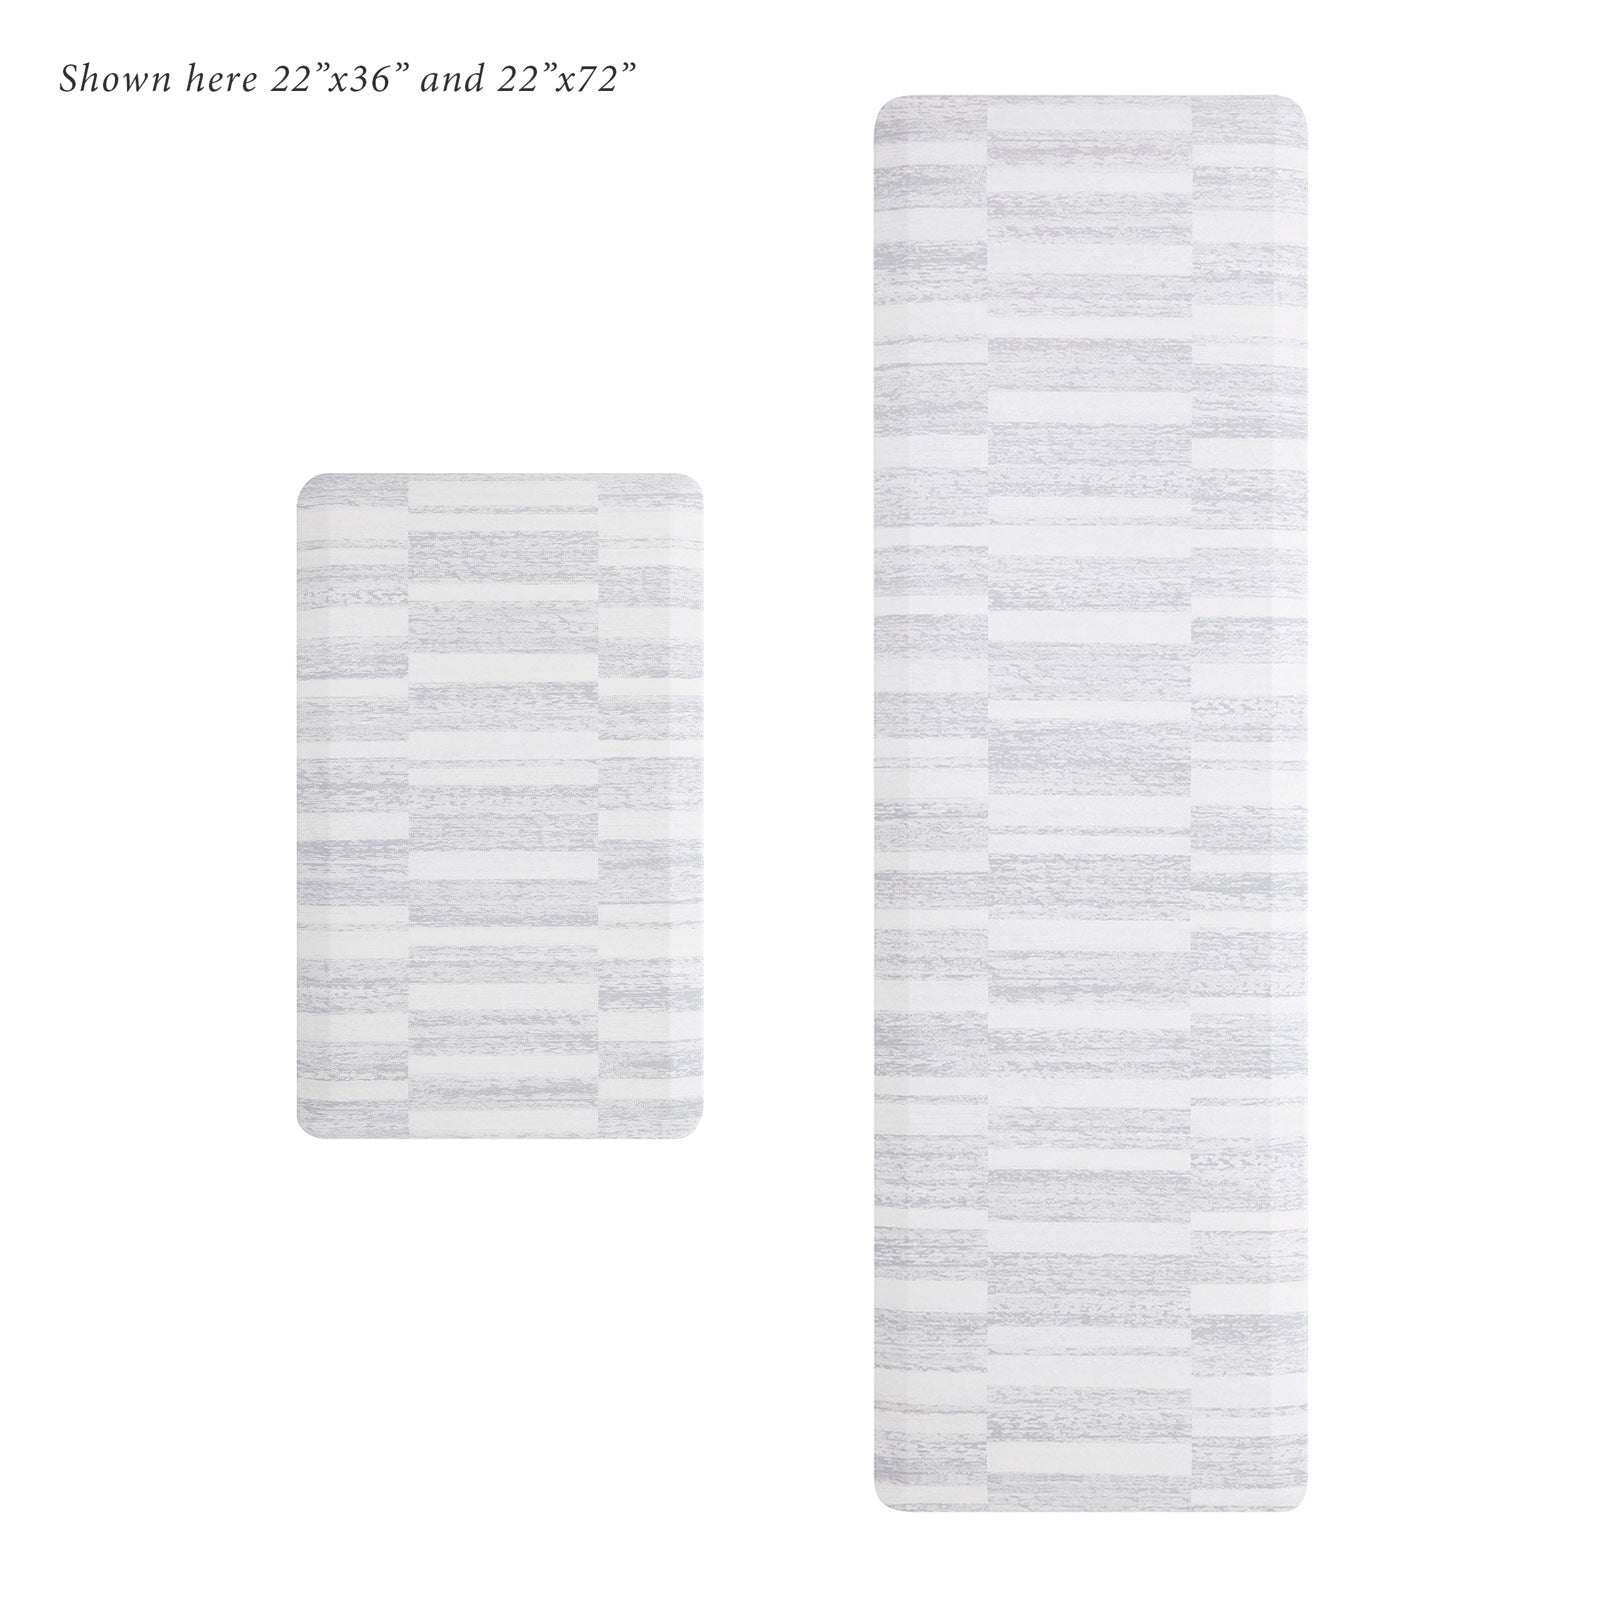 Overhead image of sutton stripe heather gray and white inverted stripe standing mat shown in size 22x36 and 22x72